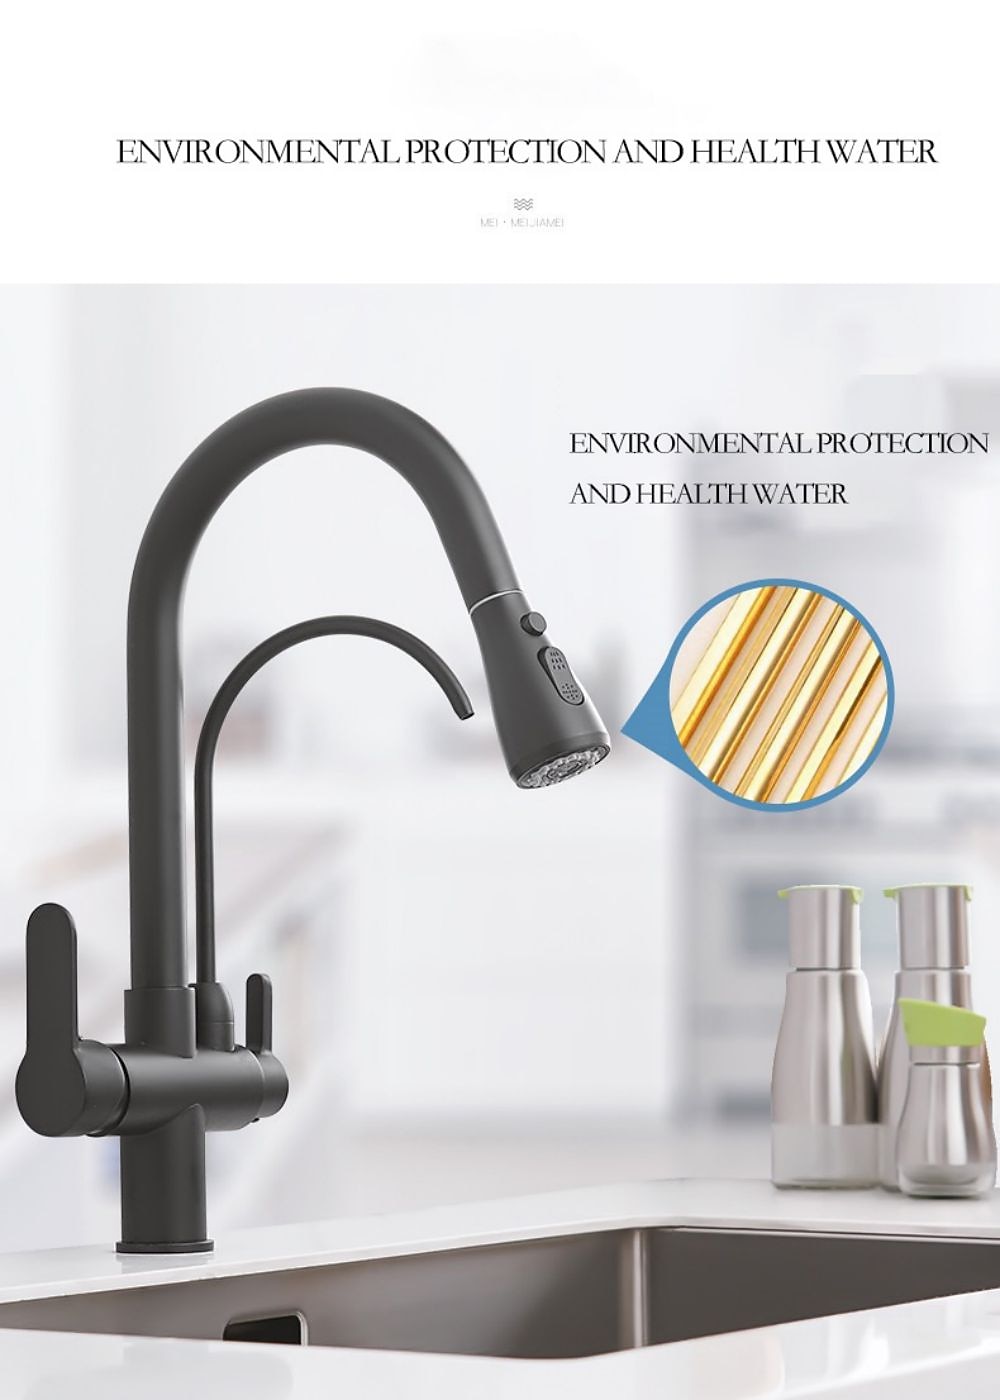 Kitchen Sink Mixer Faucet Pull Out Sprayer with Soap Dispenser, 360 swivel Black Single Handle Brass Taps Pull Down, Deck Mounted Hot Cold Water Hose Filter Tap 2024 - €138.99 –P3